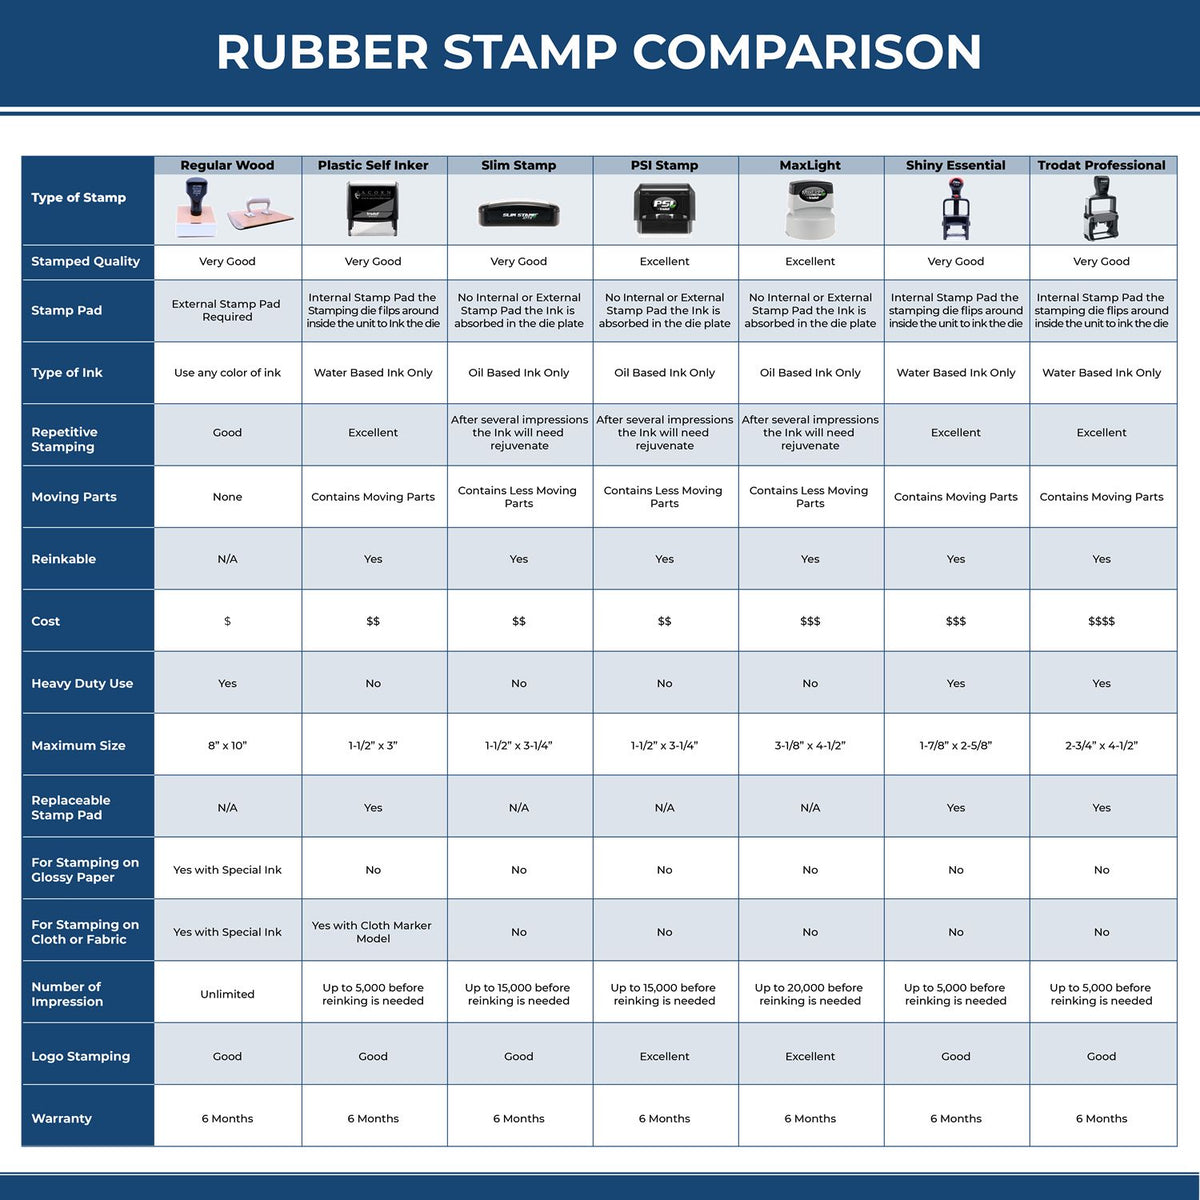 A comparison chart for the different types of mount models available for the Self-Inking Rectangular Illinois Notary Stamp.